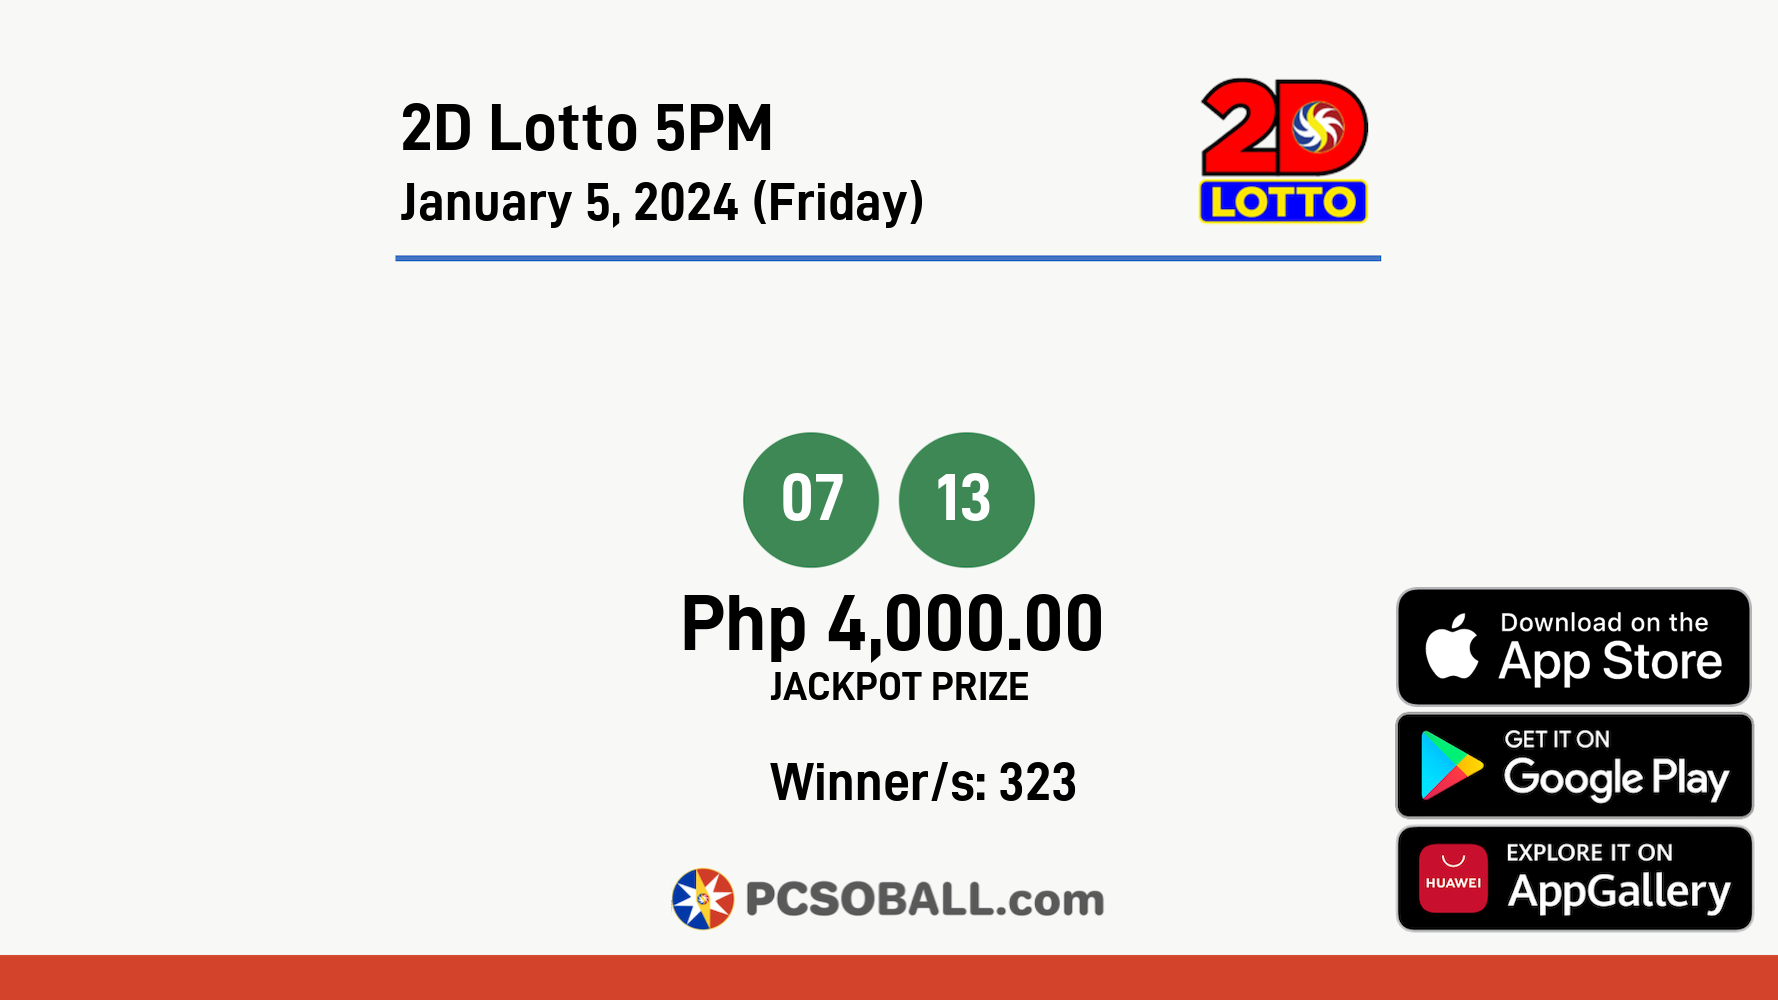 2D Lotto 5PM January 5, 2024 (Friday) Result